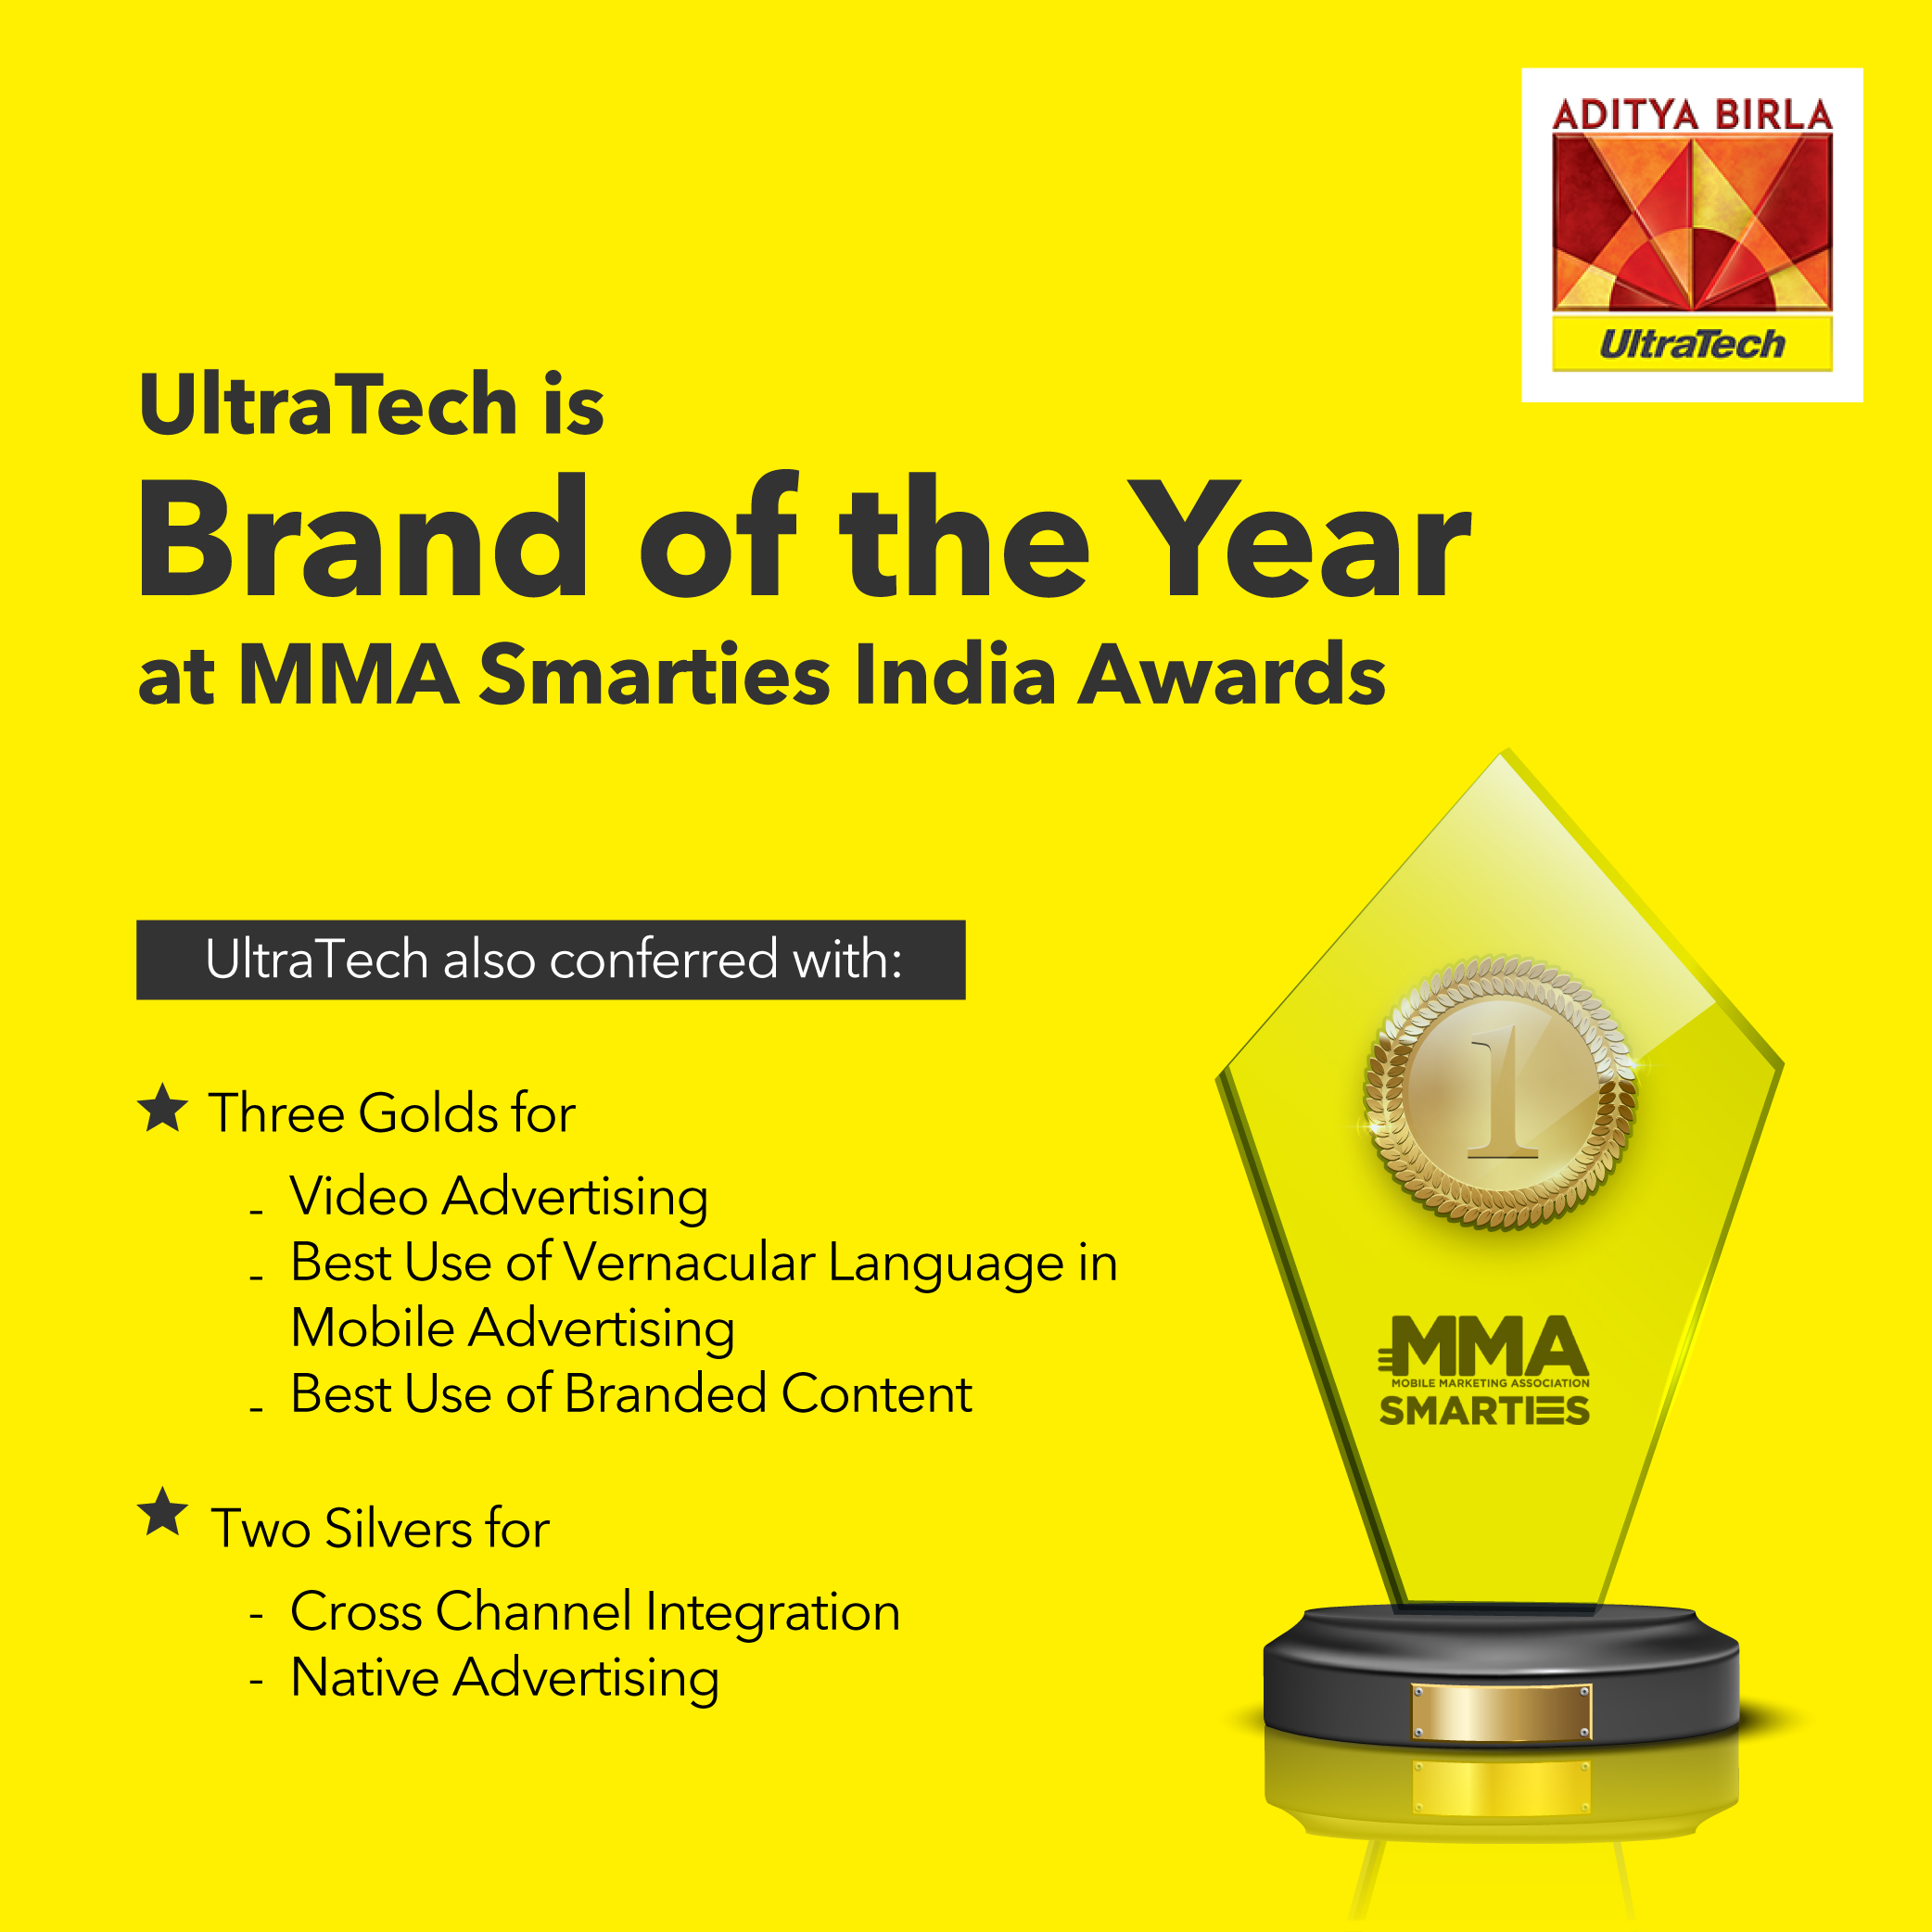 UltraTech Cement is the ‘Brand of the Year’ at MMA Smarties